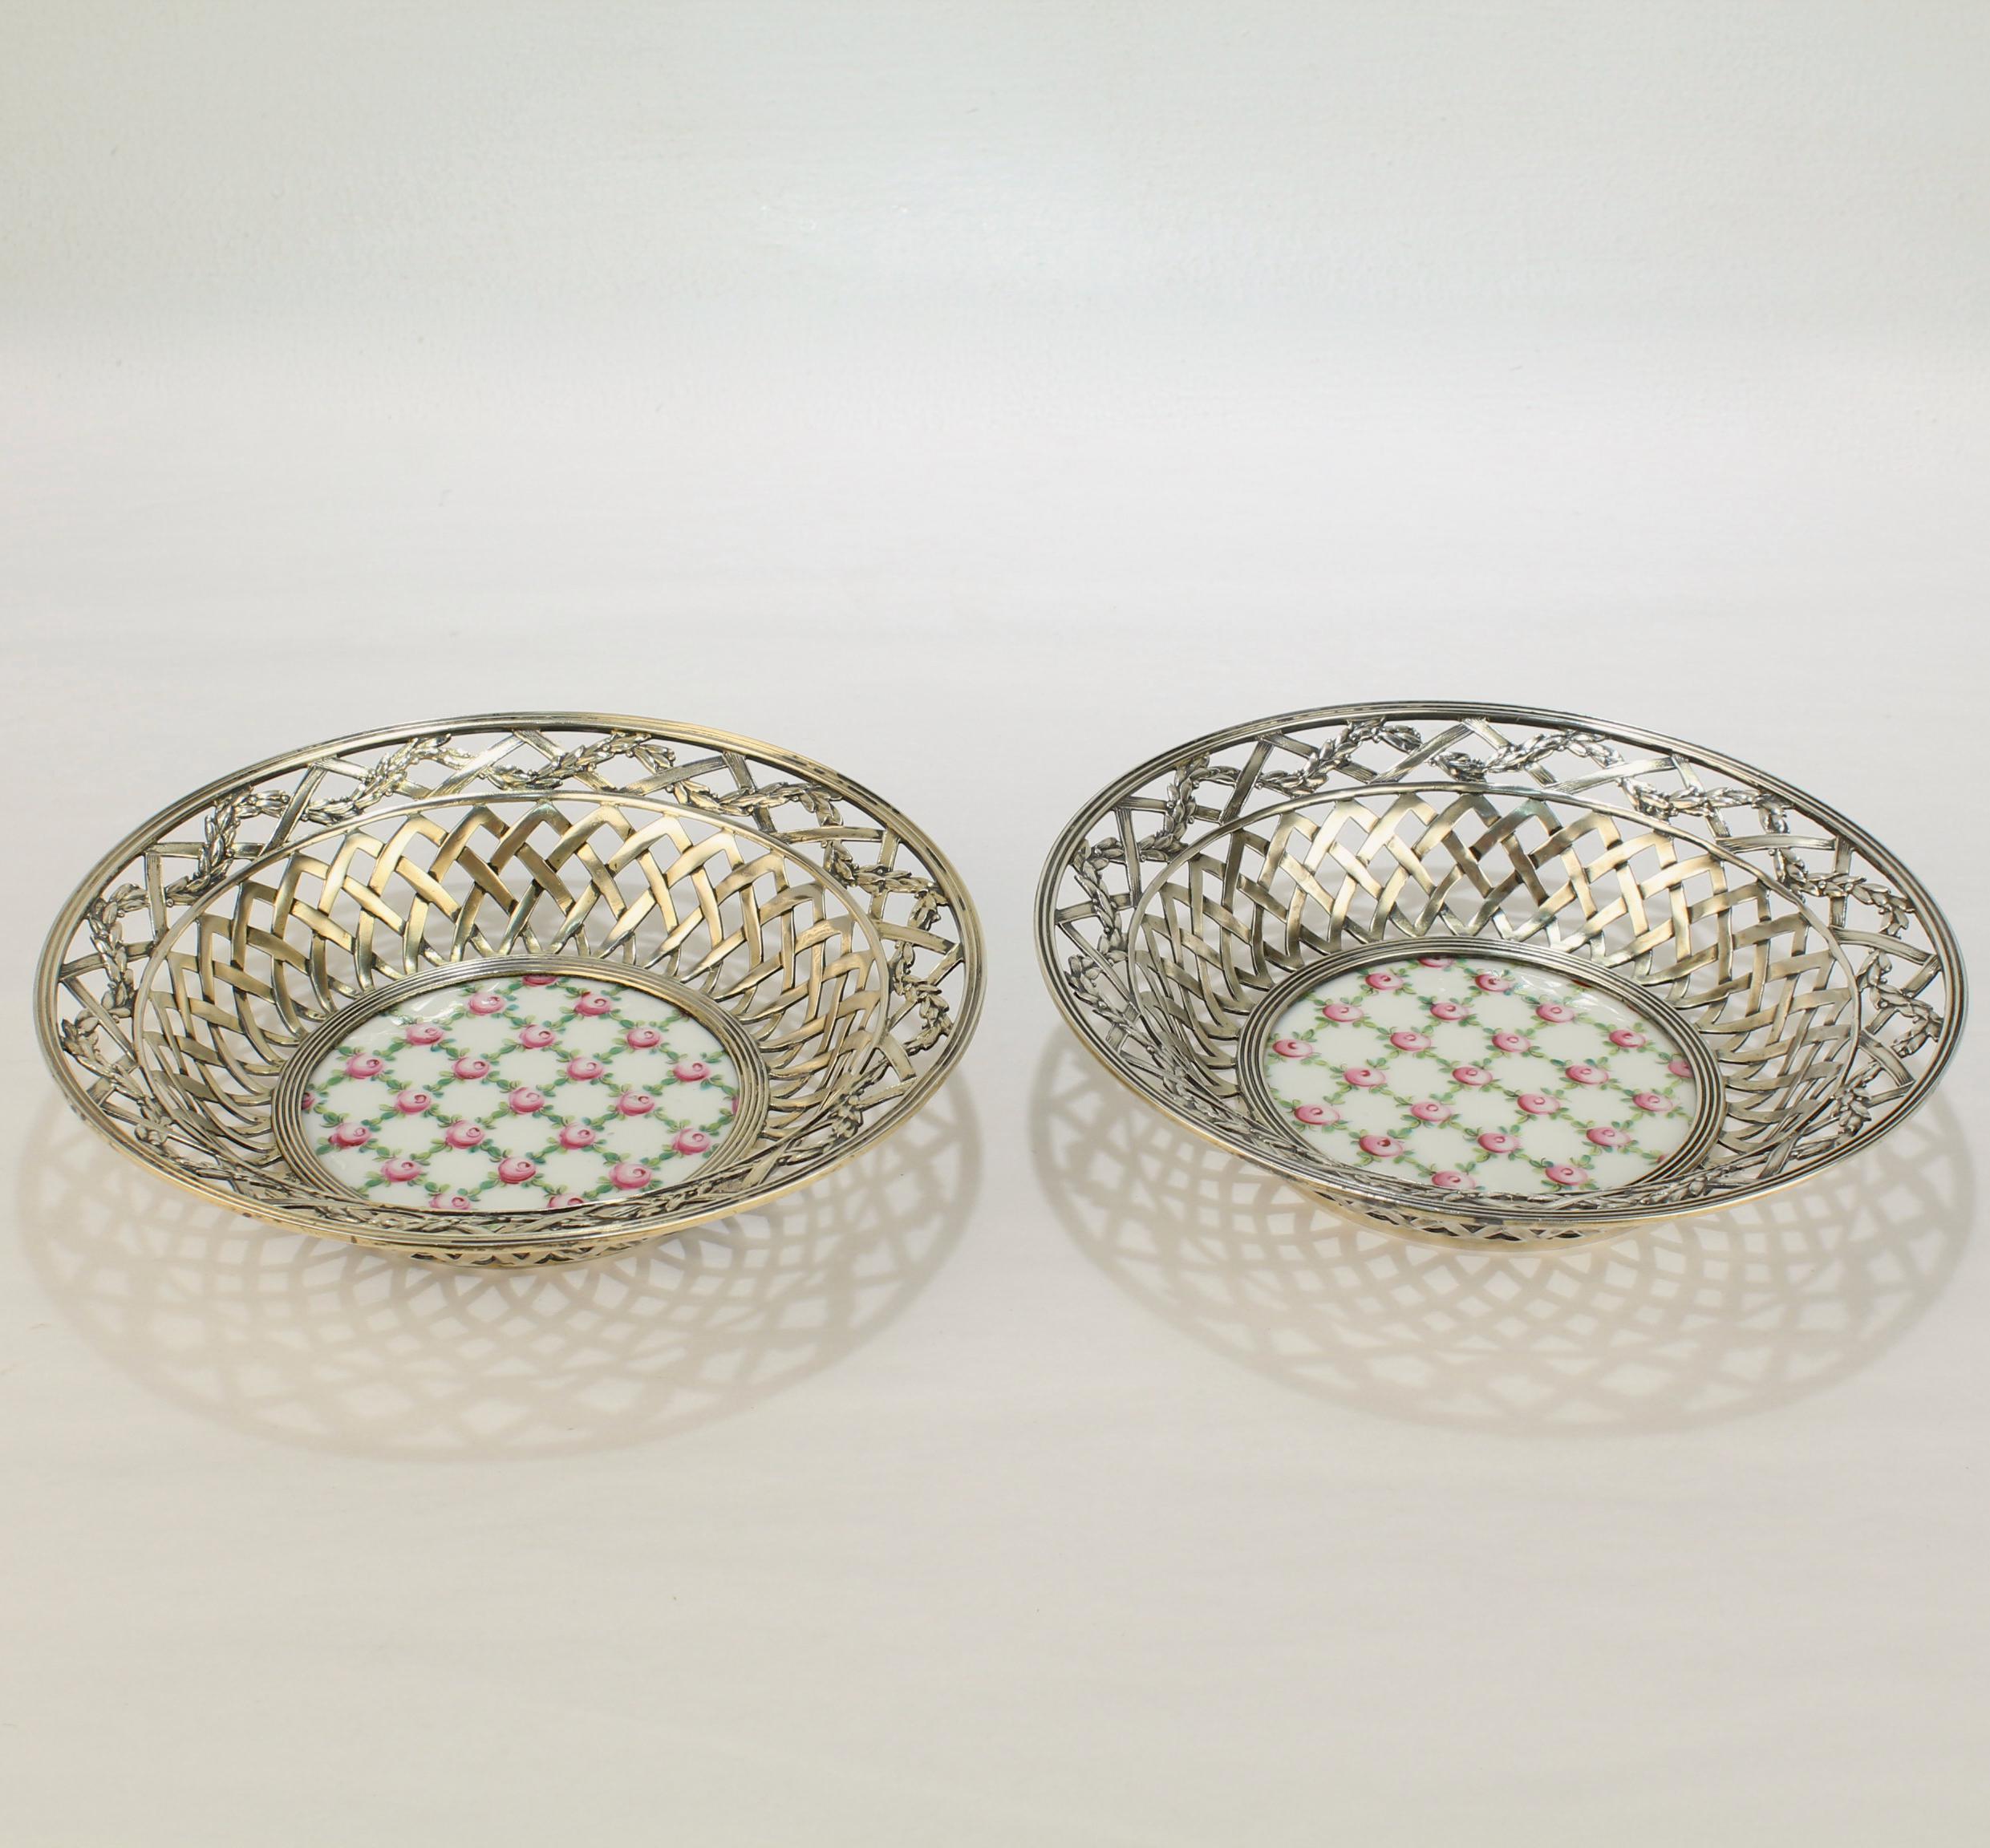 Pair of Antique Reticulated Sterling Silver Bowls with Sevres Porcelain Plaques For Sale 1